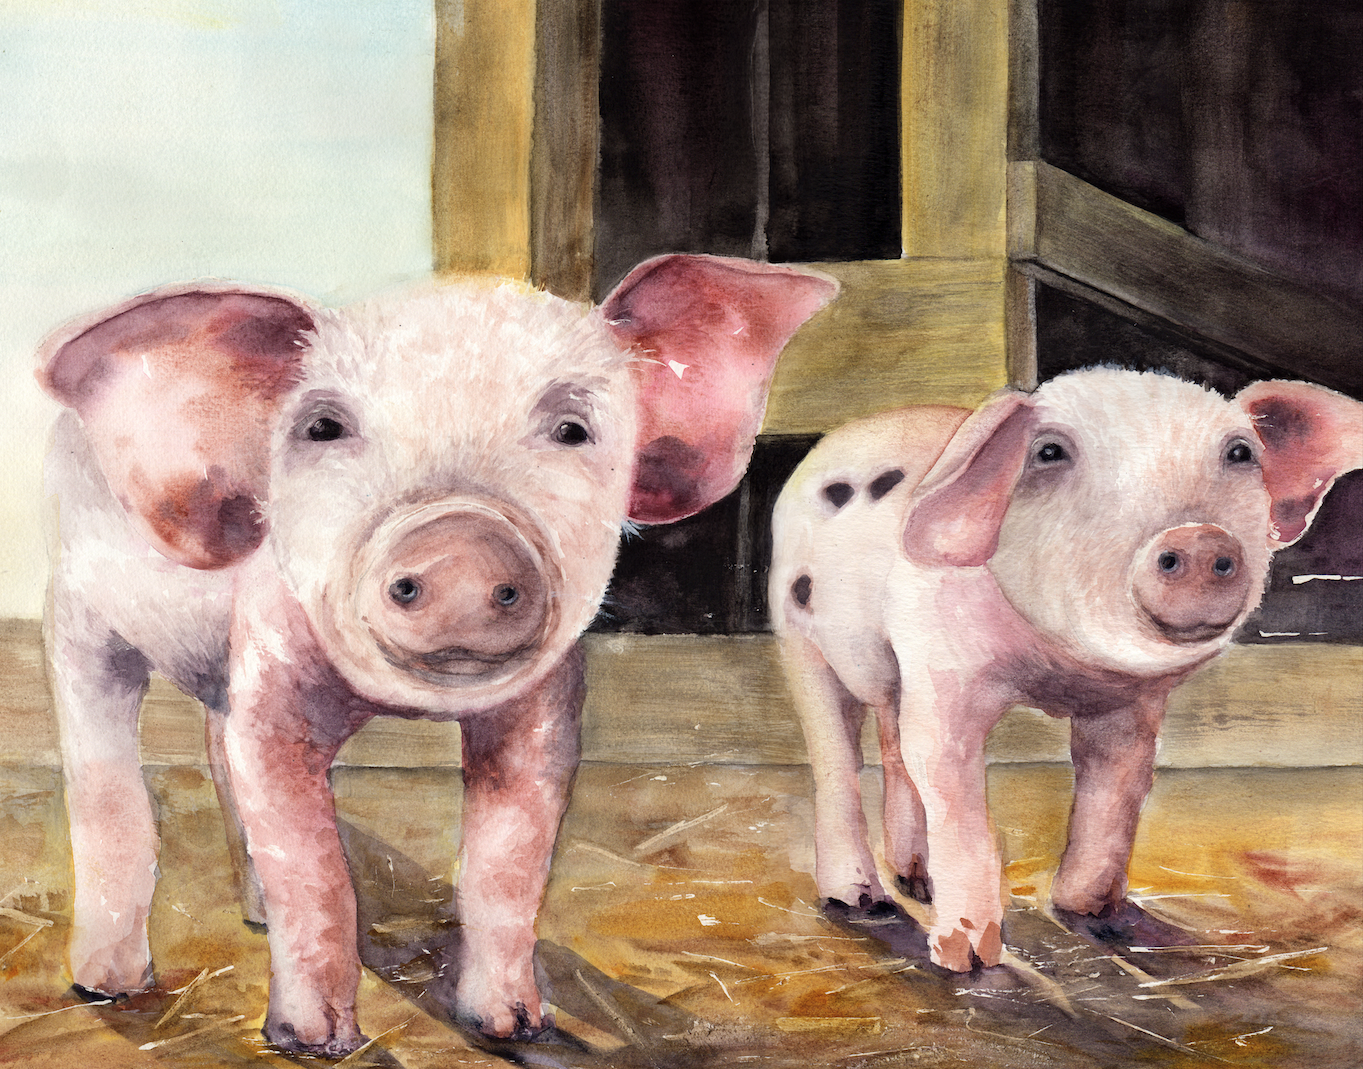 This Little Piggy Went to the Liquor Store by A.K. Turner